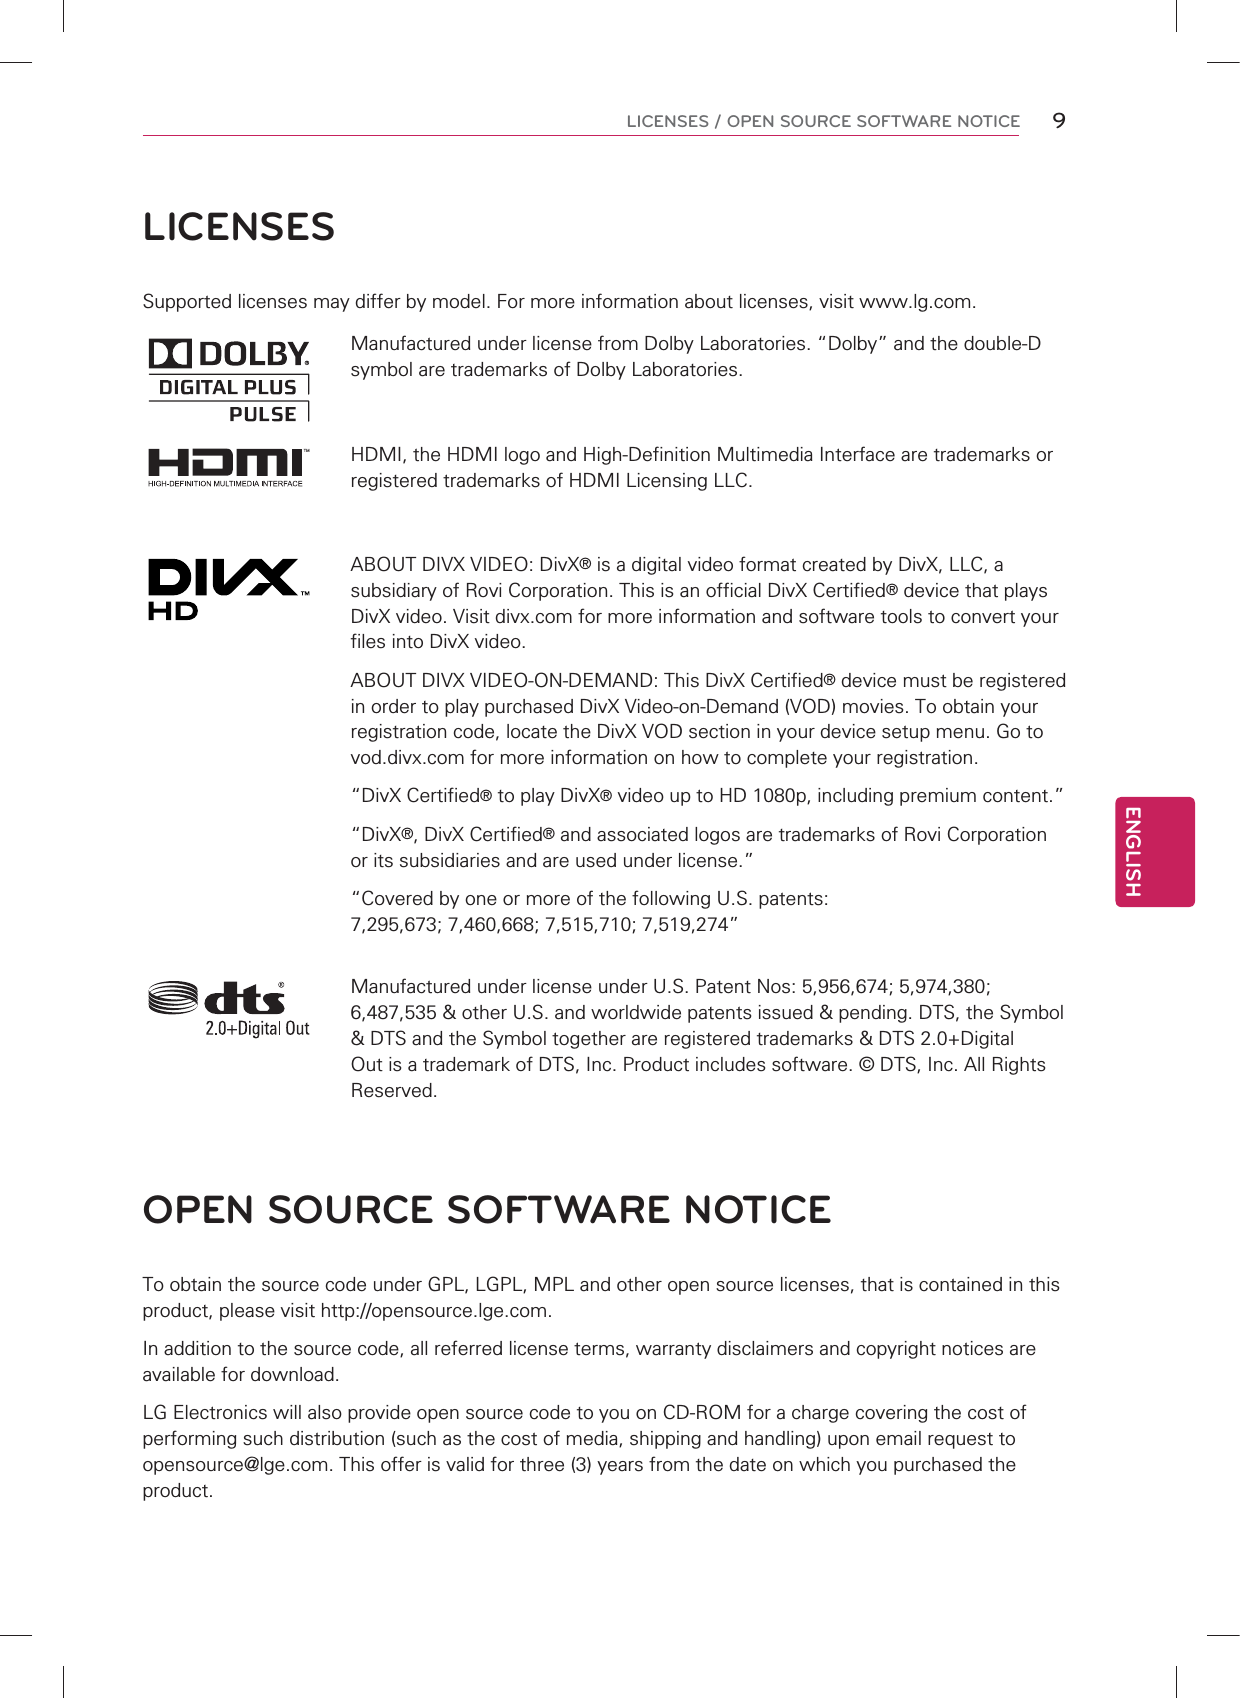 LICENSESSupported licenses may differ by model. For more information about licenses, visit www.lg.com.Manufactured under license from Dolby Laboratories. “Dolby” and the double-D symbol are trademarks of Dolby Laboratories.HDMI, the HDMI logo and High-Definition Multimedia Interface are trademarks or registered trademarks of HDMI Licensing LLC.ABOUT DIVX VIDEO: DivX® is a digital video format created by DivX, LLC, a subsidiary of Rovi Corporation. This is an official DivX Certified® device that plays DivX video. Visit divx.com for more information and software tools to convert your files into DivX video.ABOUT DIVX VIDEO-ON-DEMAND: This DivX Certified® device must be registered in order to play purchased DivX Video-on-Demand (VOD) movies. To obtain your registration code, locate the DivX VOD section in your device setup menu. Go to vod.divx.com for more information on how to complete your registration. “DivX Certified® to play DivX® video up to HD 1080p, including premium content.”“DivX®, DivX Certified® and associated logos are trademarks of Rovi Corporation or its subsidiaries and are used under license.”“Covered by one or more of the following U.S. patents: 7,295,673; 7,460,668; 7,515,710; 7,519,274”Manufactured under license under U.S. Patent Nos: 5,956,674; 5,974,380; 6,487,535 &amp; other U.S. and worldwide patents issued &amp; pending. DTS, the Symbol &amp; DTS and the Symbol together are registered trademarks &amp; DTS 2.0+Digital Out is a trademark of DTS, Inc. Product includes software. © DTS, Inc. All Rights Reserved.OPEN SOURCE SOFTWARE NOTICETo obtain the source code under GPL, LGPL, MPL and other open source licenses, that is contained in this product, please visit http://opensource.lge.com.In addition to the source code, all referred license terms, warranty disclaimers and copyright notices are available for download.LG Electronics will also provide open source code to you on CD-ROM for a charge covering the cost of performing such distribution (such as the cost of media, shipping and handling) upon email request to opensource@lge.com. This offer is valid for three (3) years from the date on which you purchased the product.ENGLISH9LICENSES / OPEN SOURCE SOFTWARE NOTICE